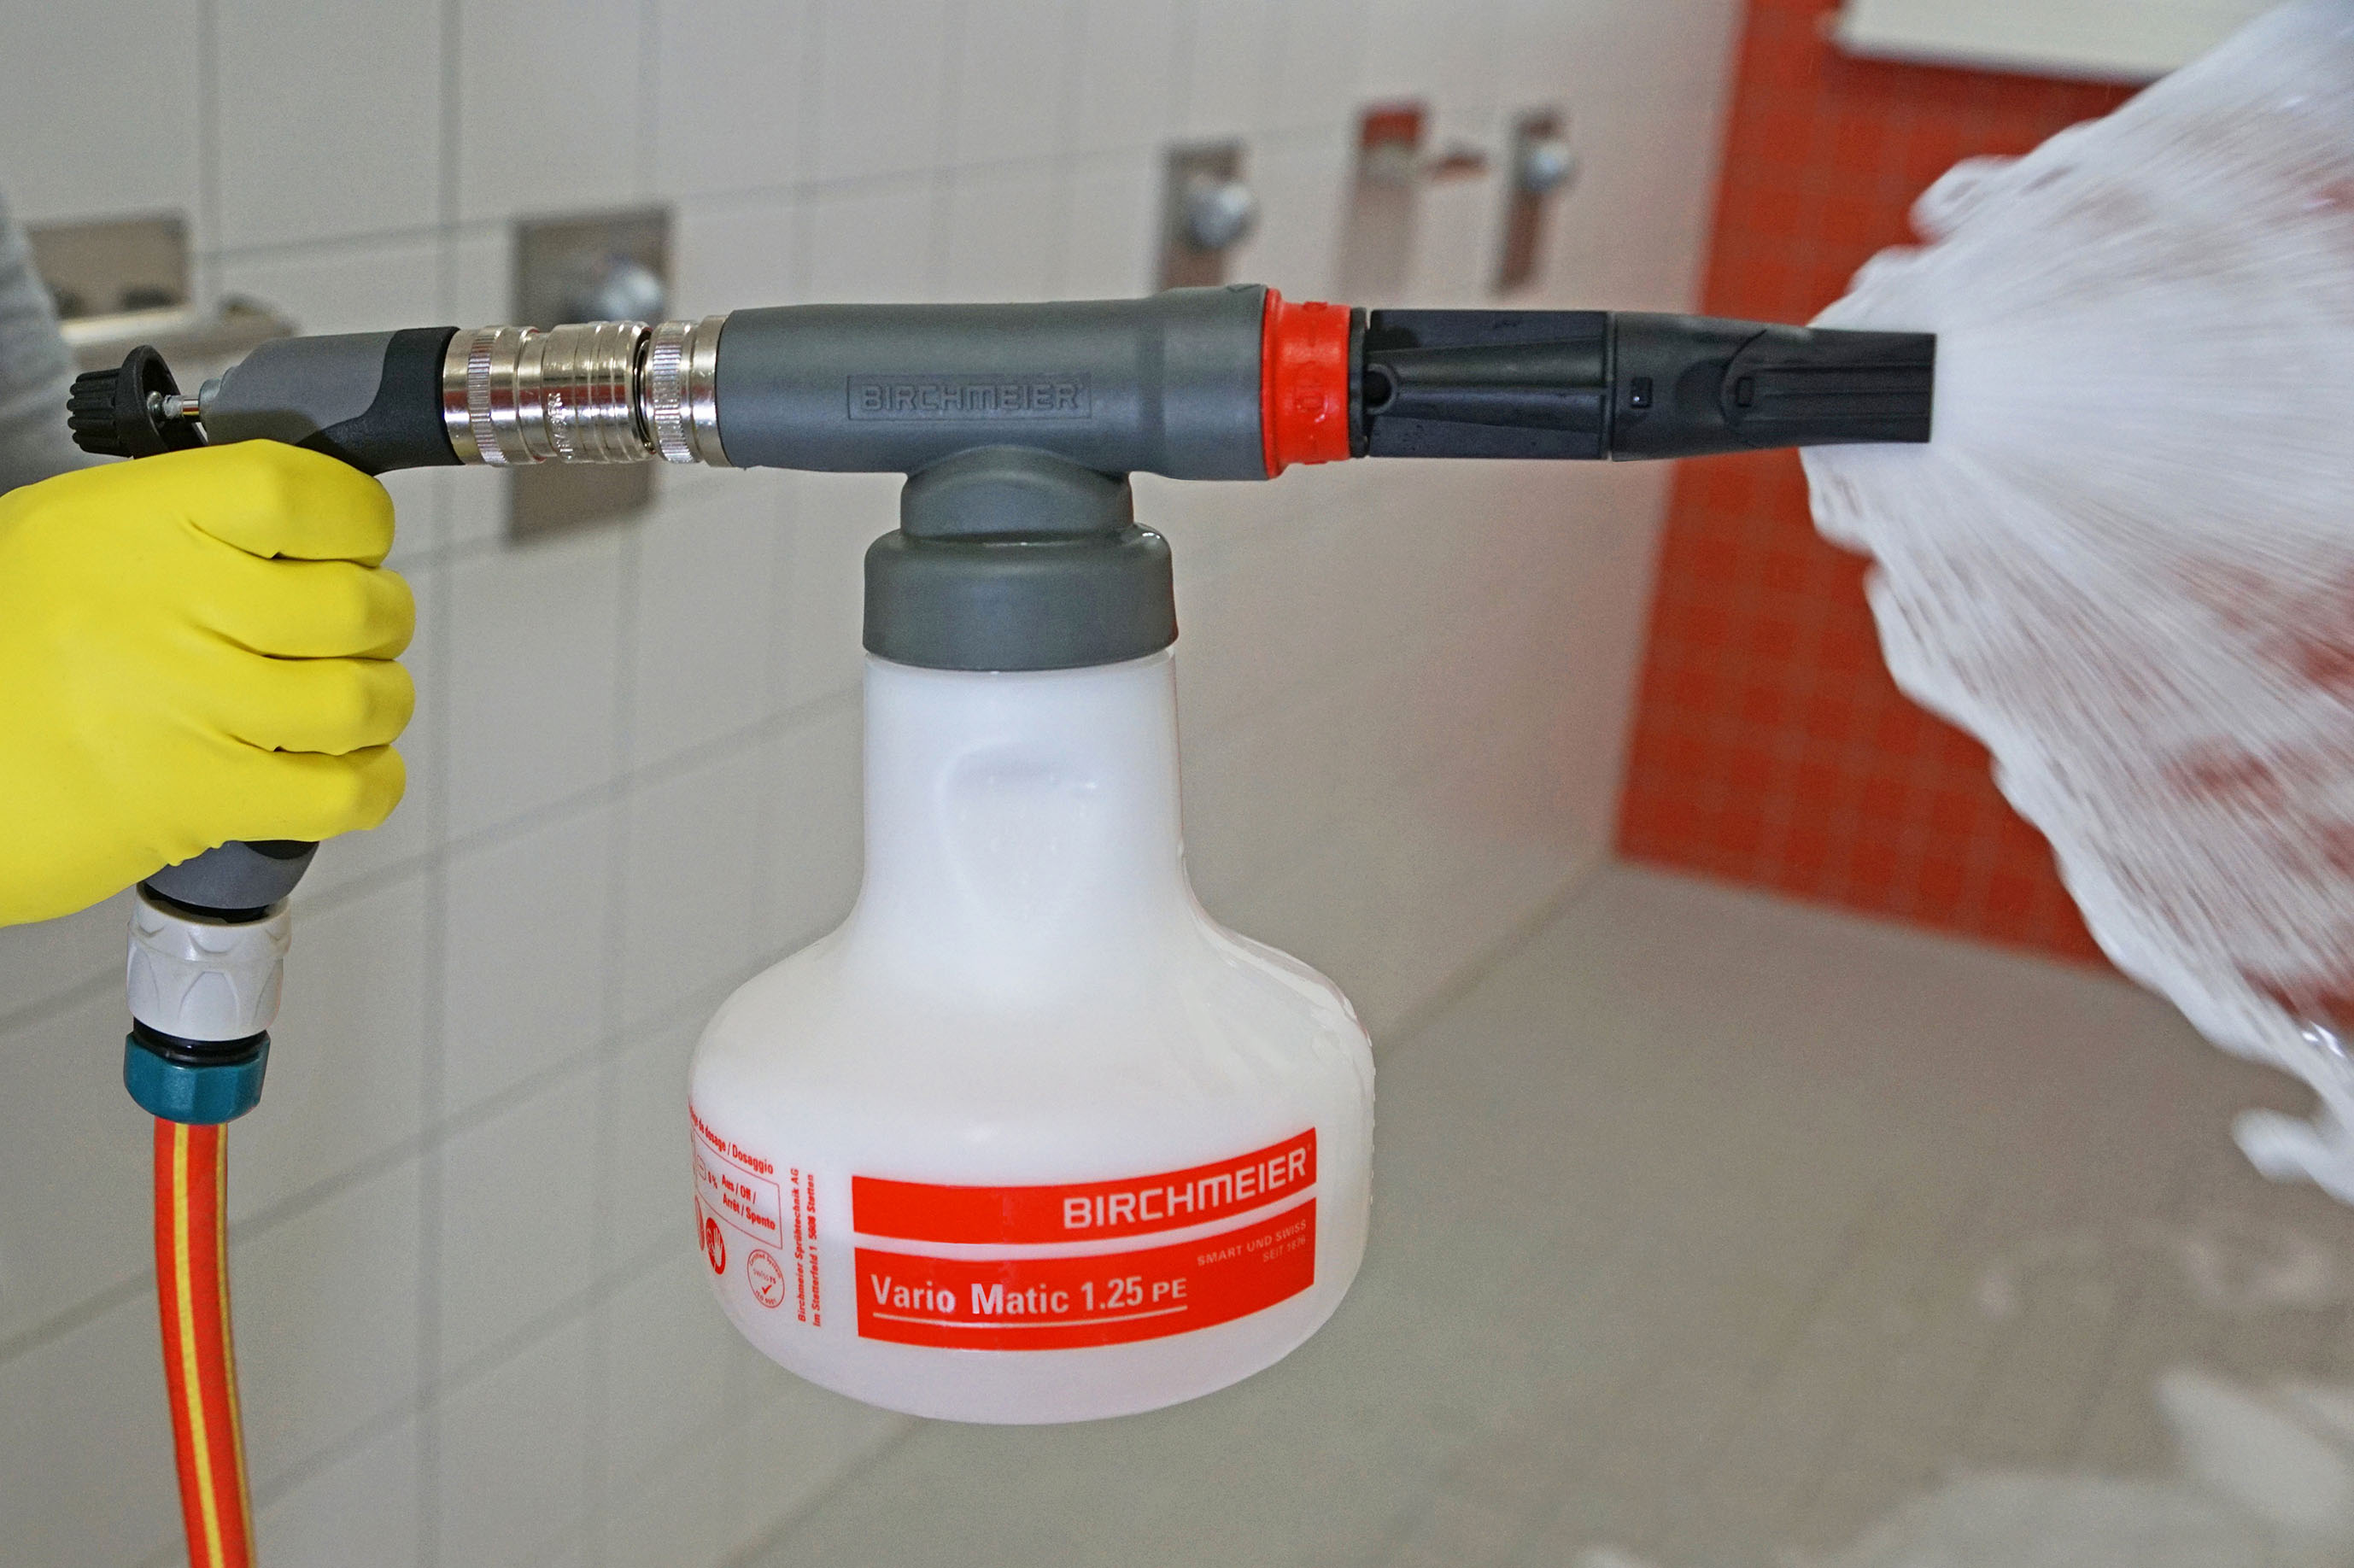 Vario-Matic 1.25 PE from Birchmeier for cleaning & disinfecting in sanitary facilities